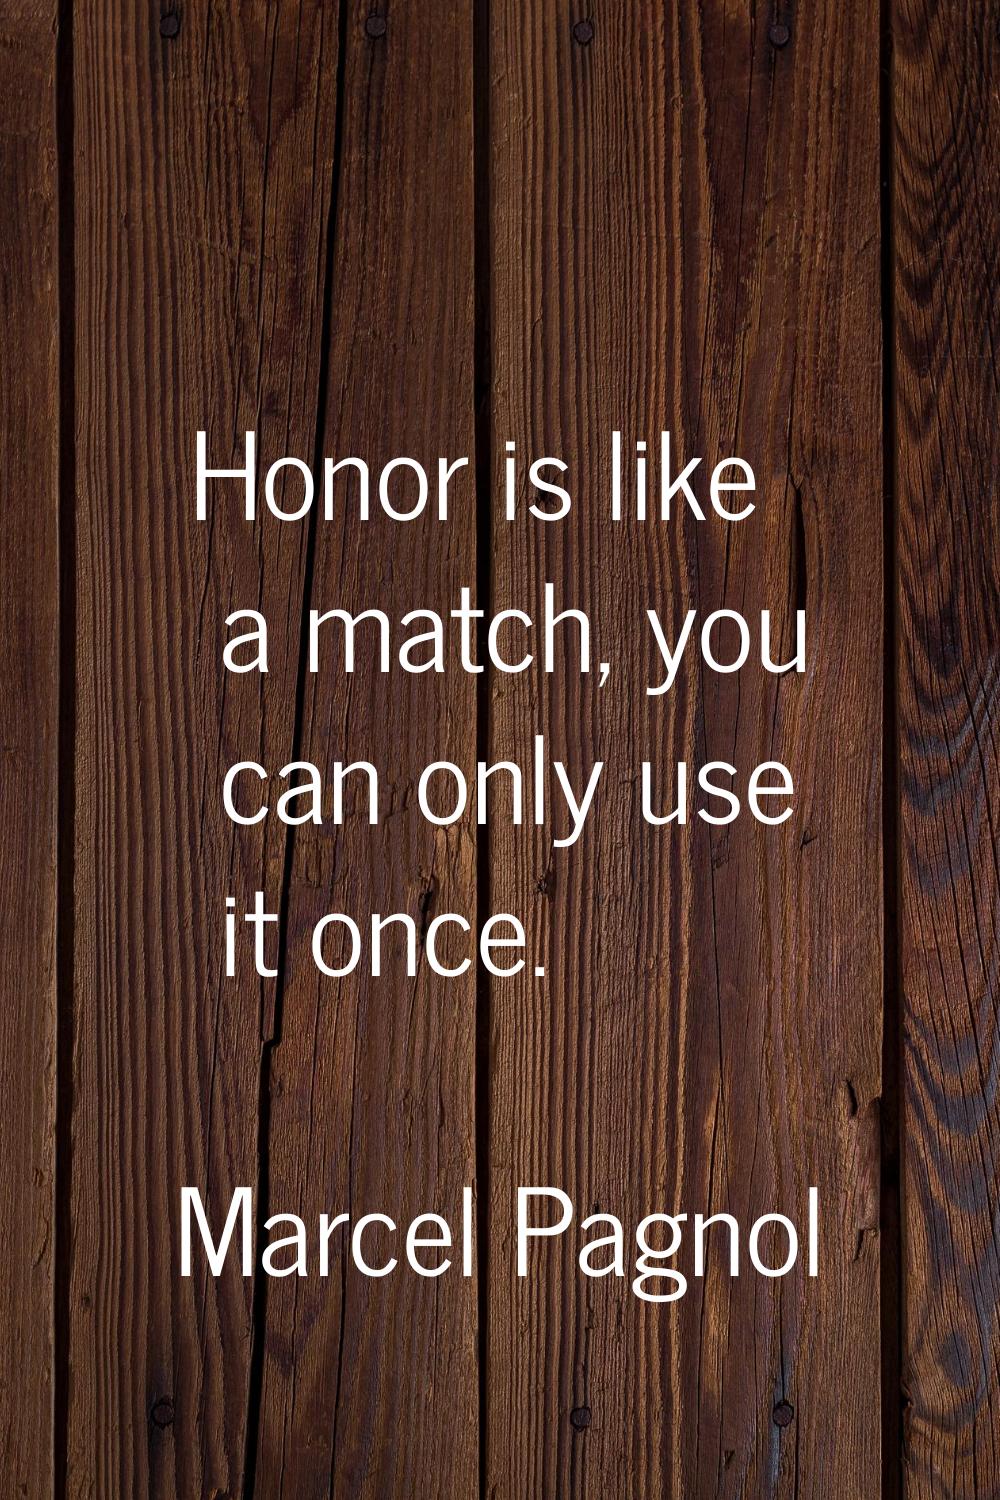 Honor is like a match, you can only use it once.